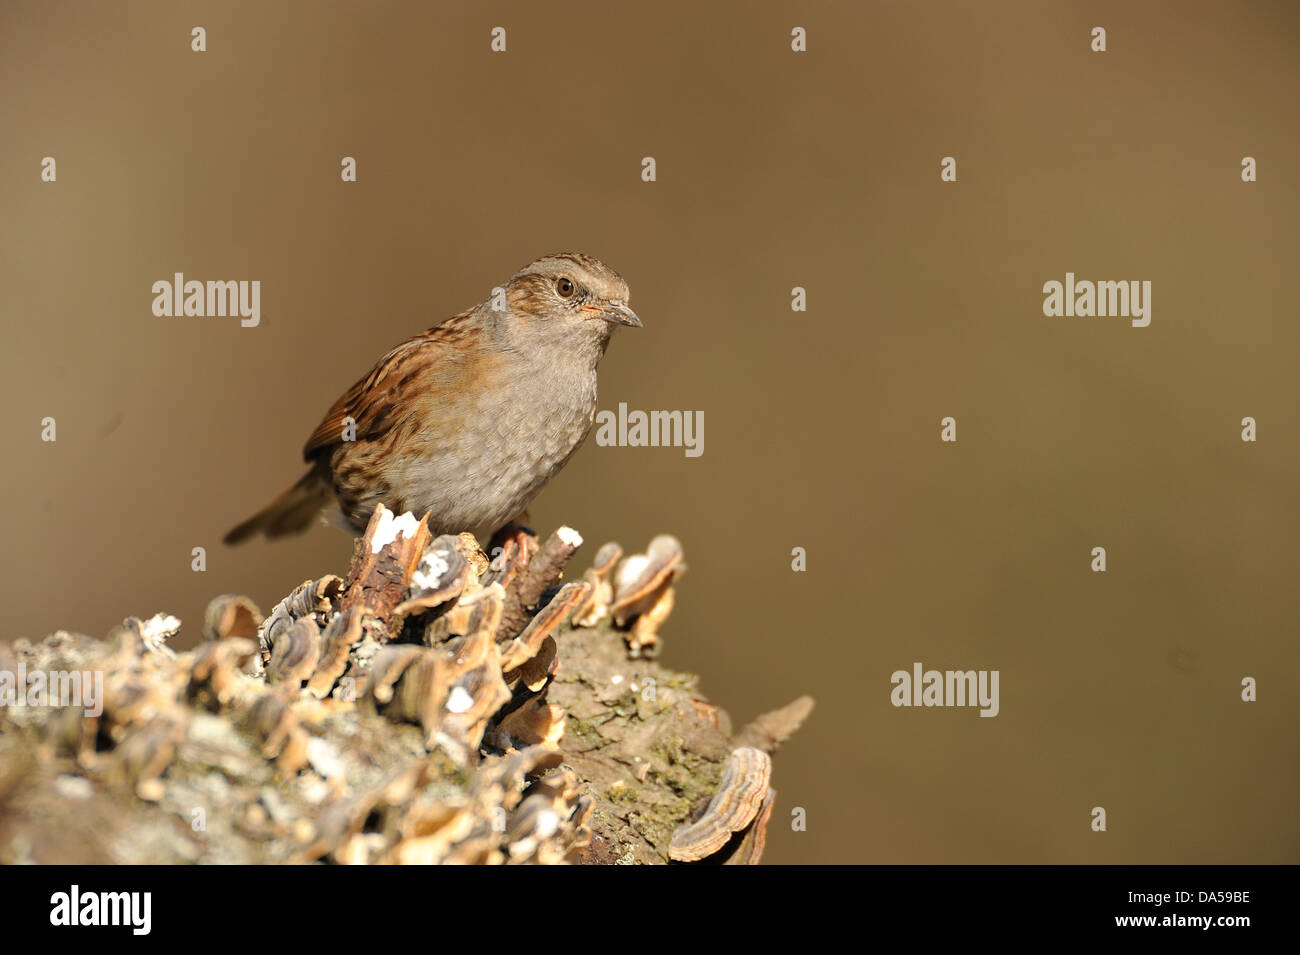 Dunnock accentor - Hedge accentor - Hedge-sparrow (Prunella modularis) perched on dead branch covered with mushrooms in winter Stock Photo